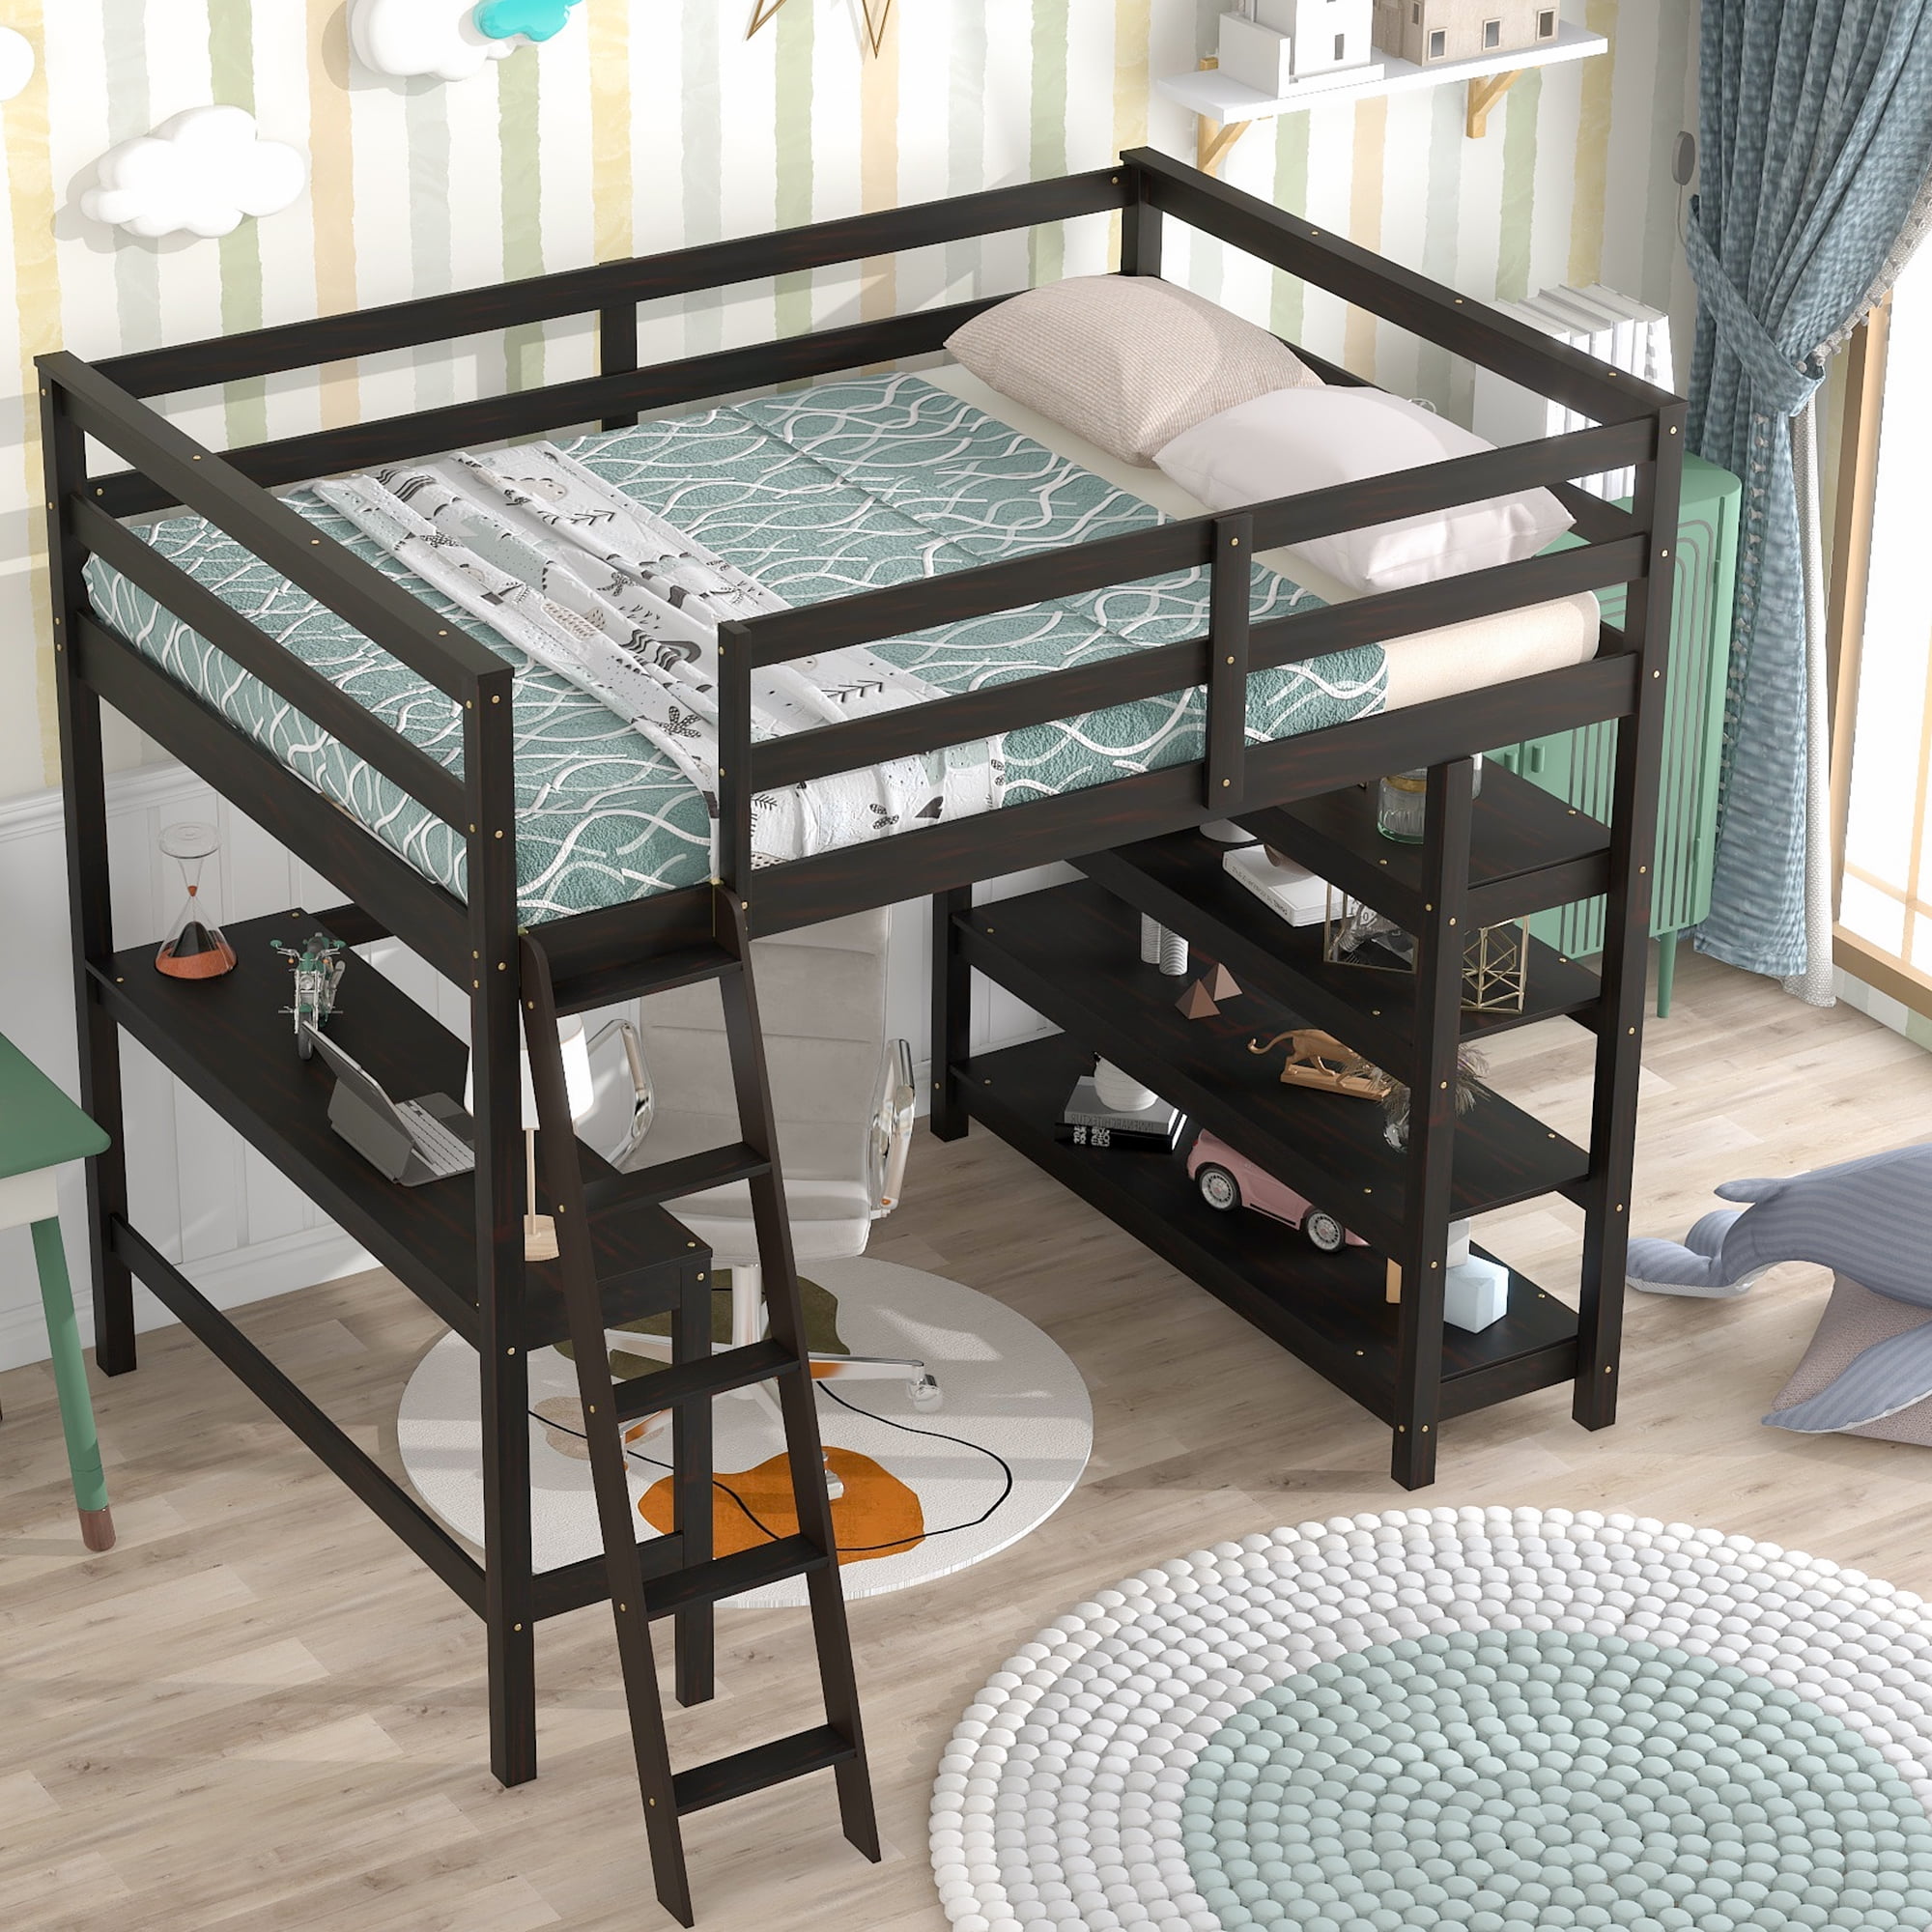 Wood Full Loft Bed with Desk, Full Size Loft Bed with 4 Tier Storage ...